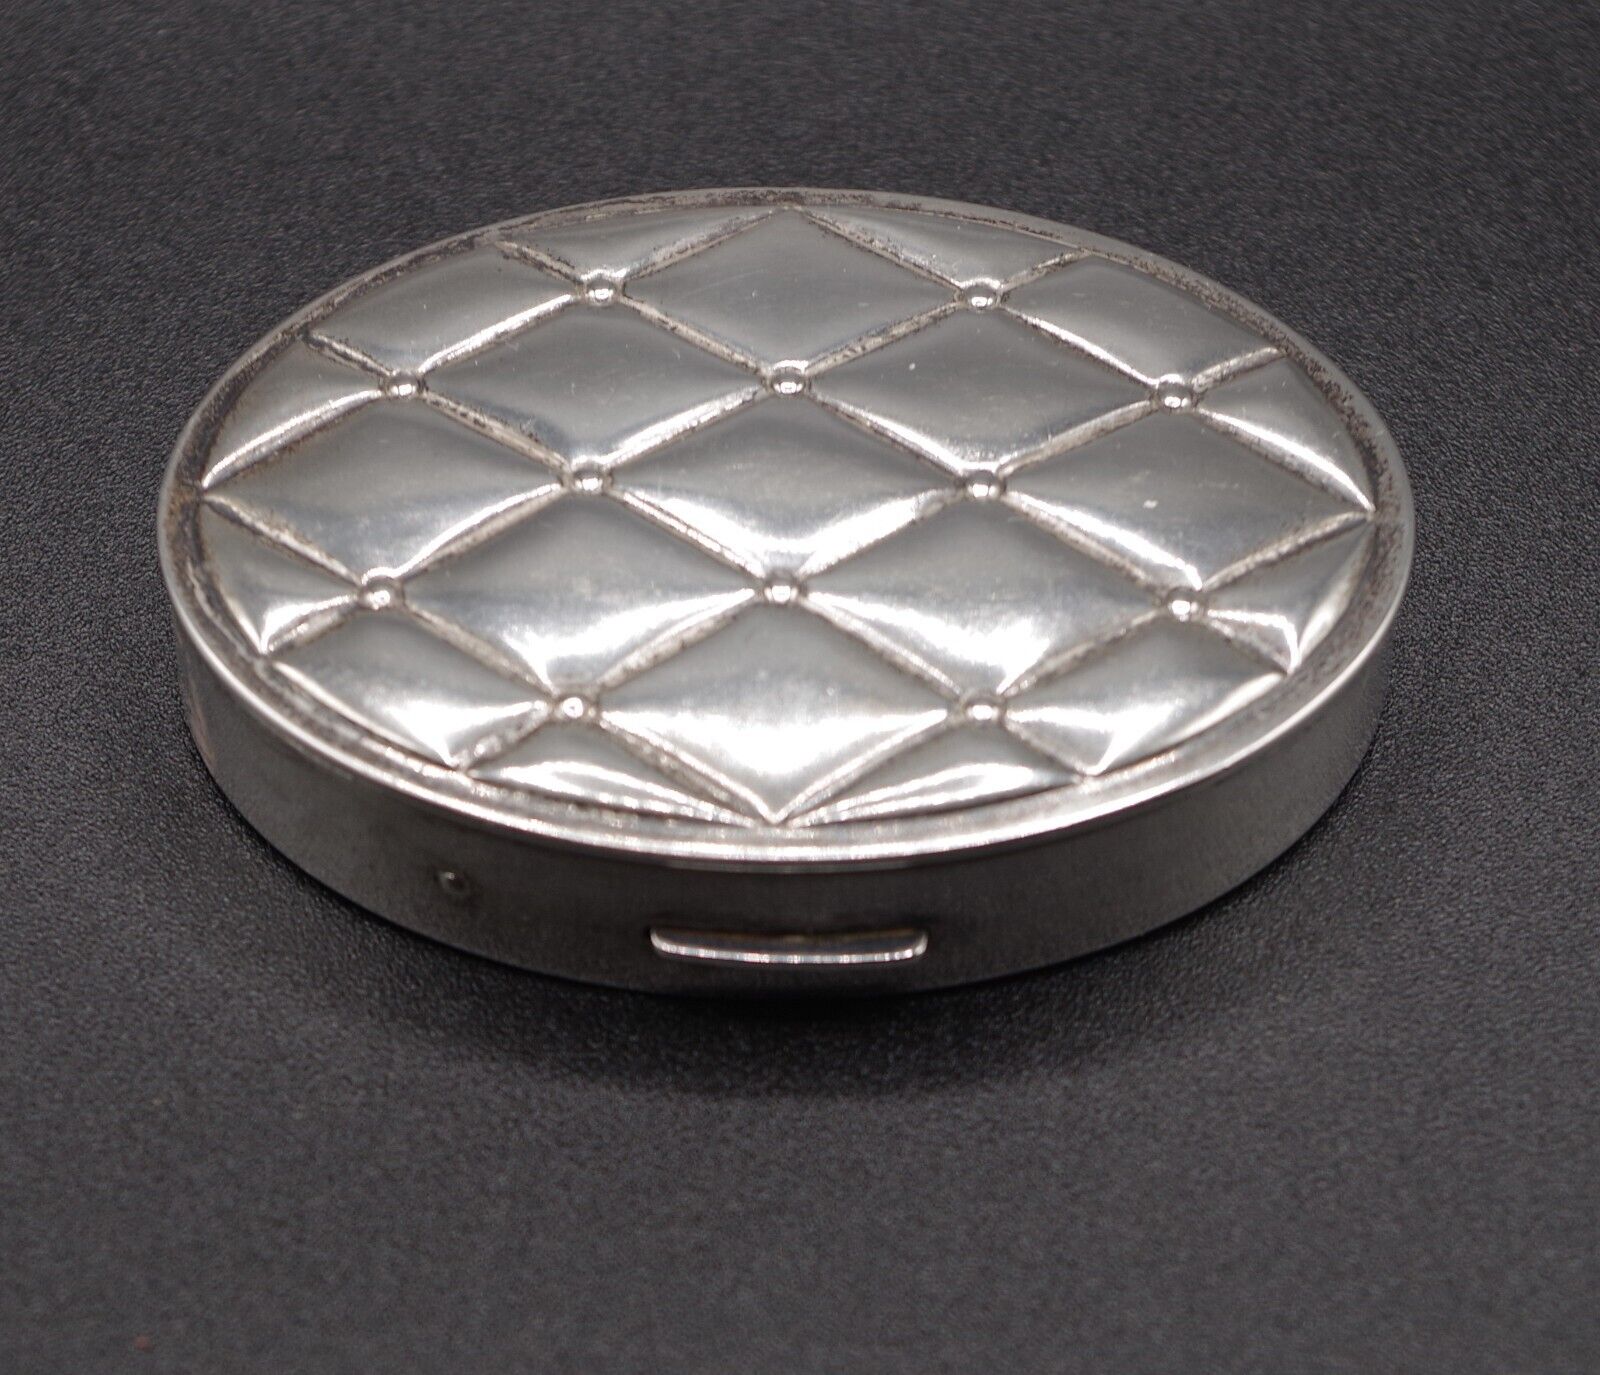 MAJESTIC STERLING SILVER QUILTED ART DECO POWDER COMPACT VINTAGE MARKED